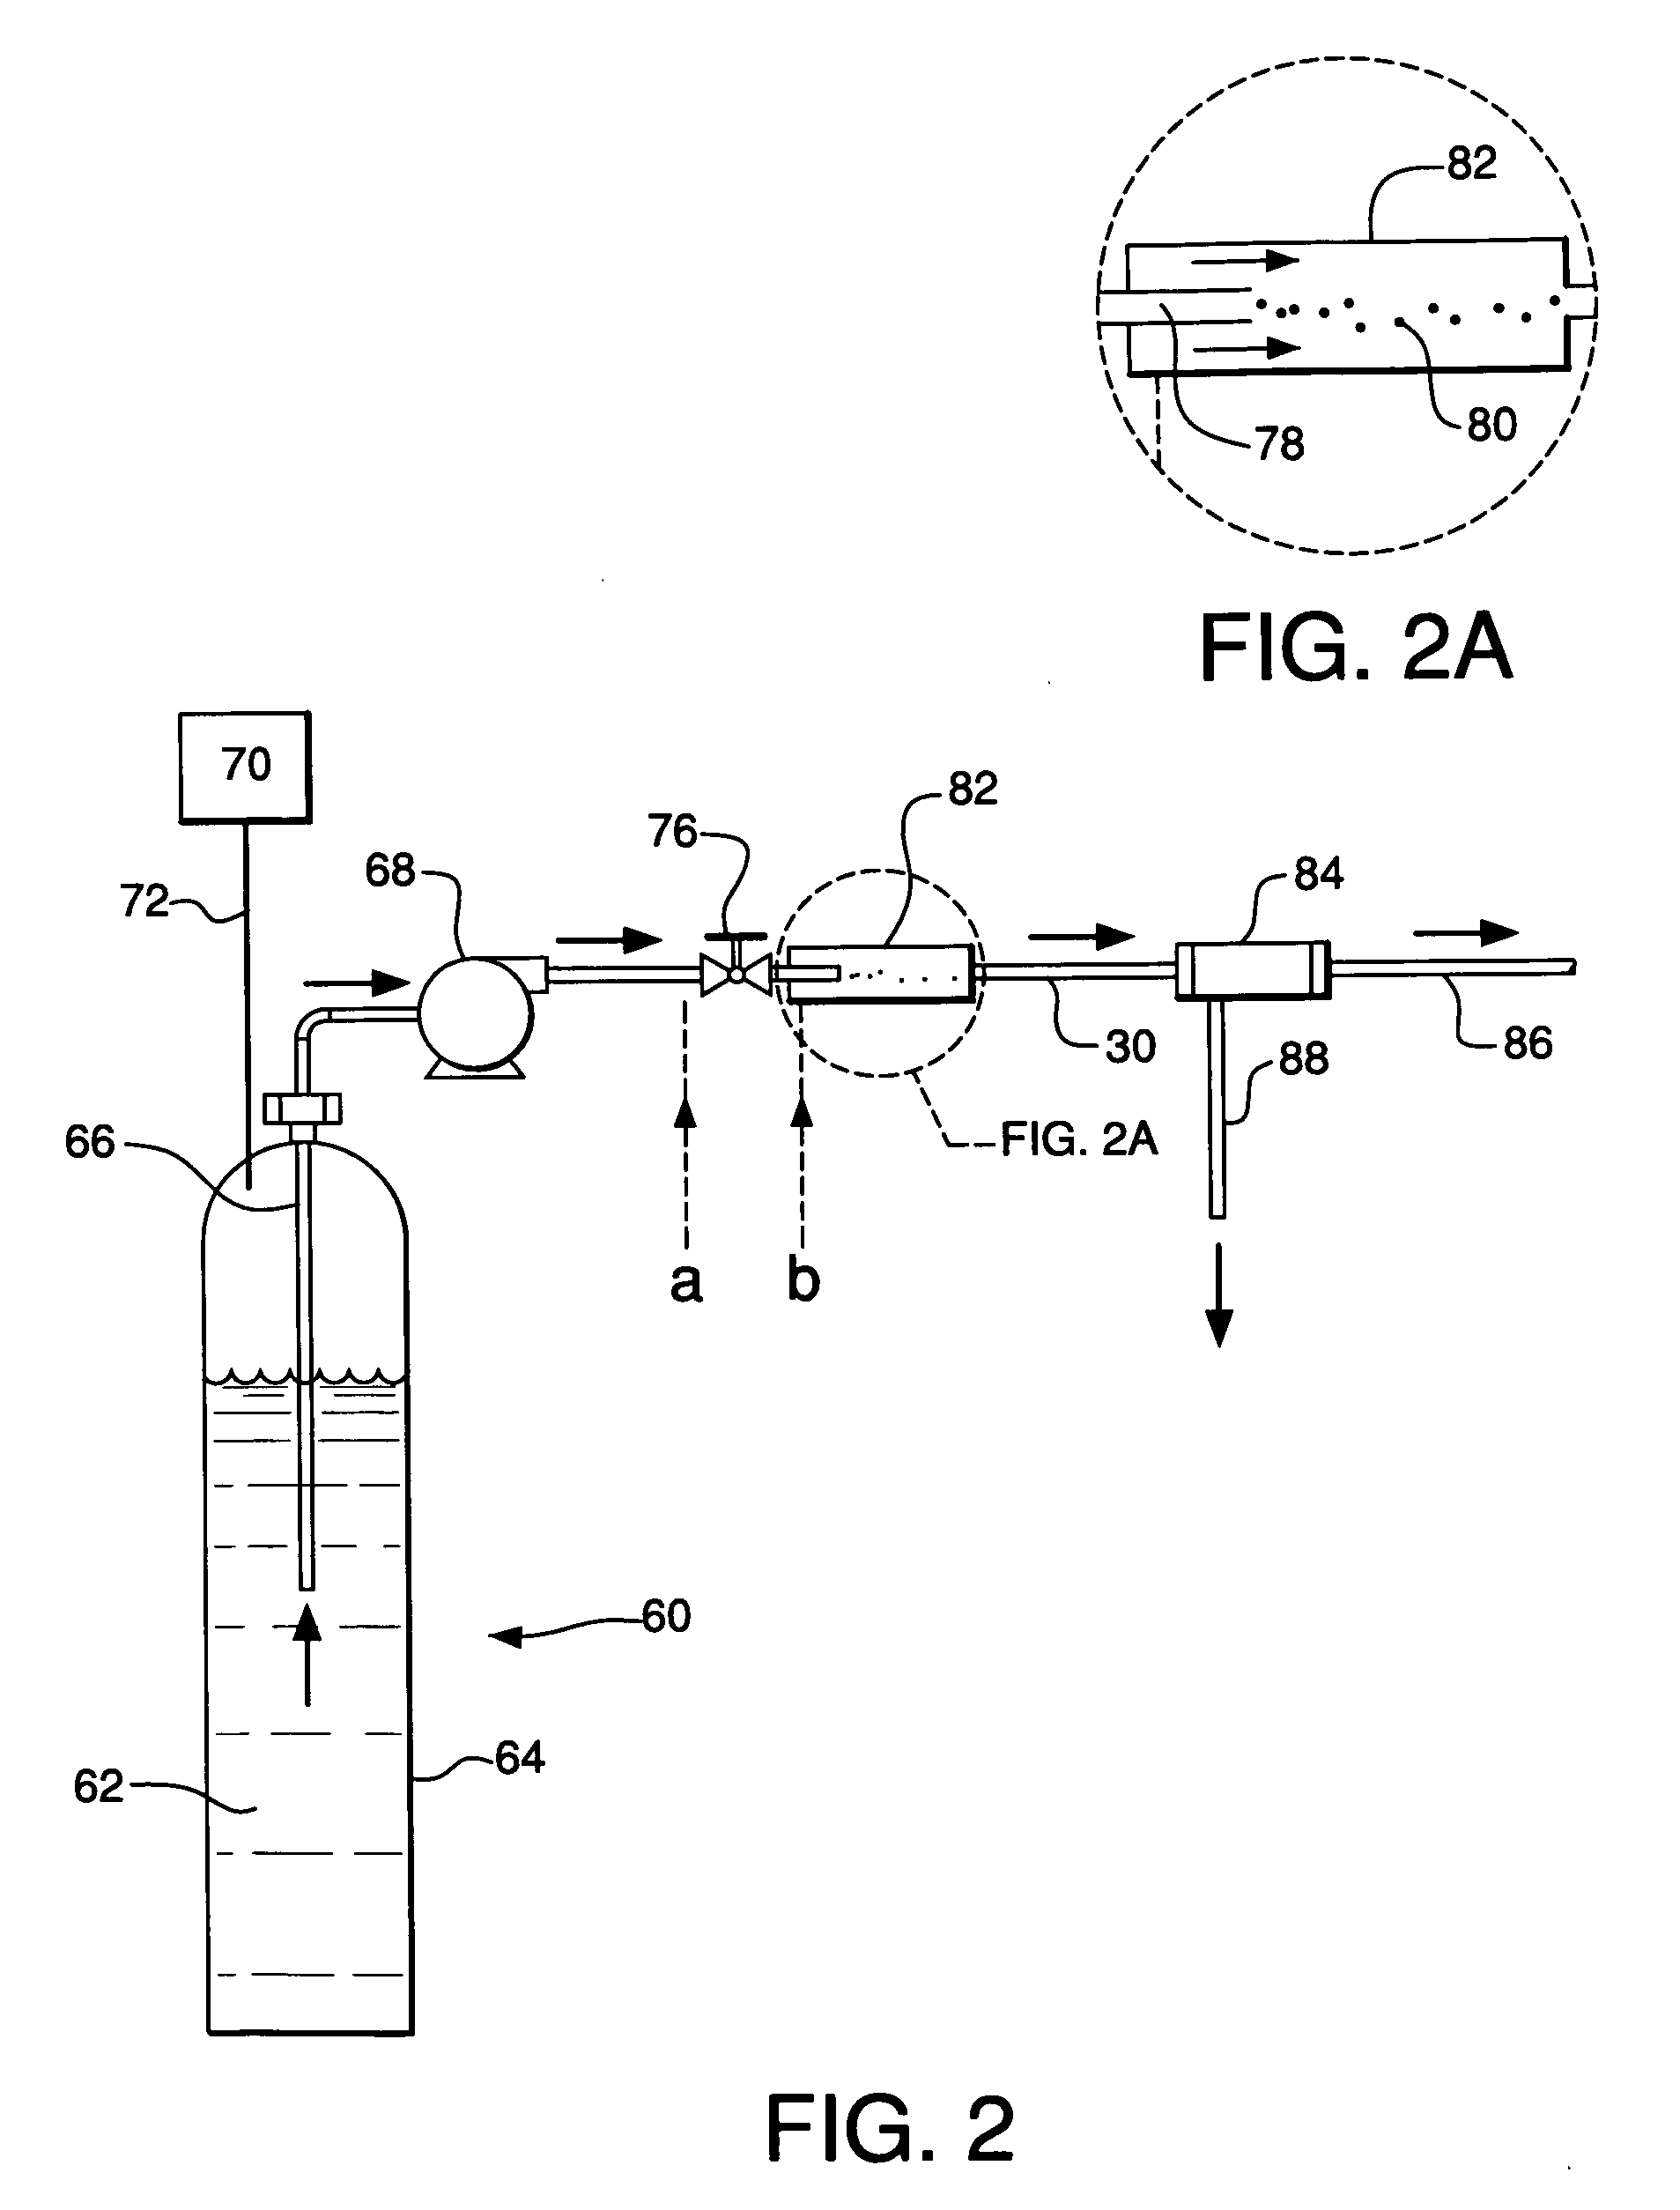 Contact methods for formation of Lewis gas/liquid systems and recovery of Lewis gas therefrom